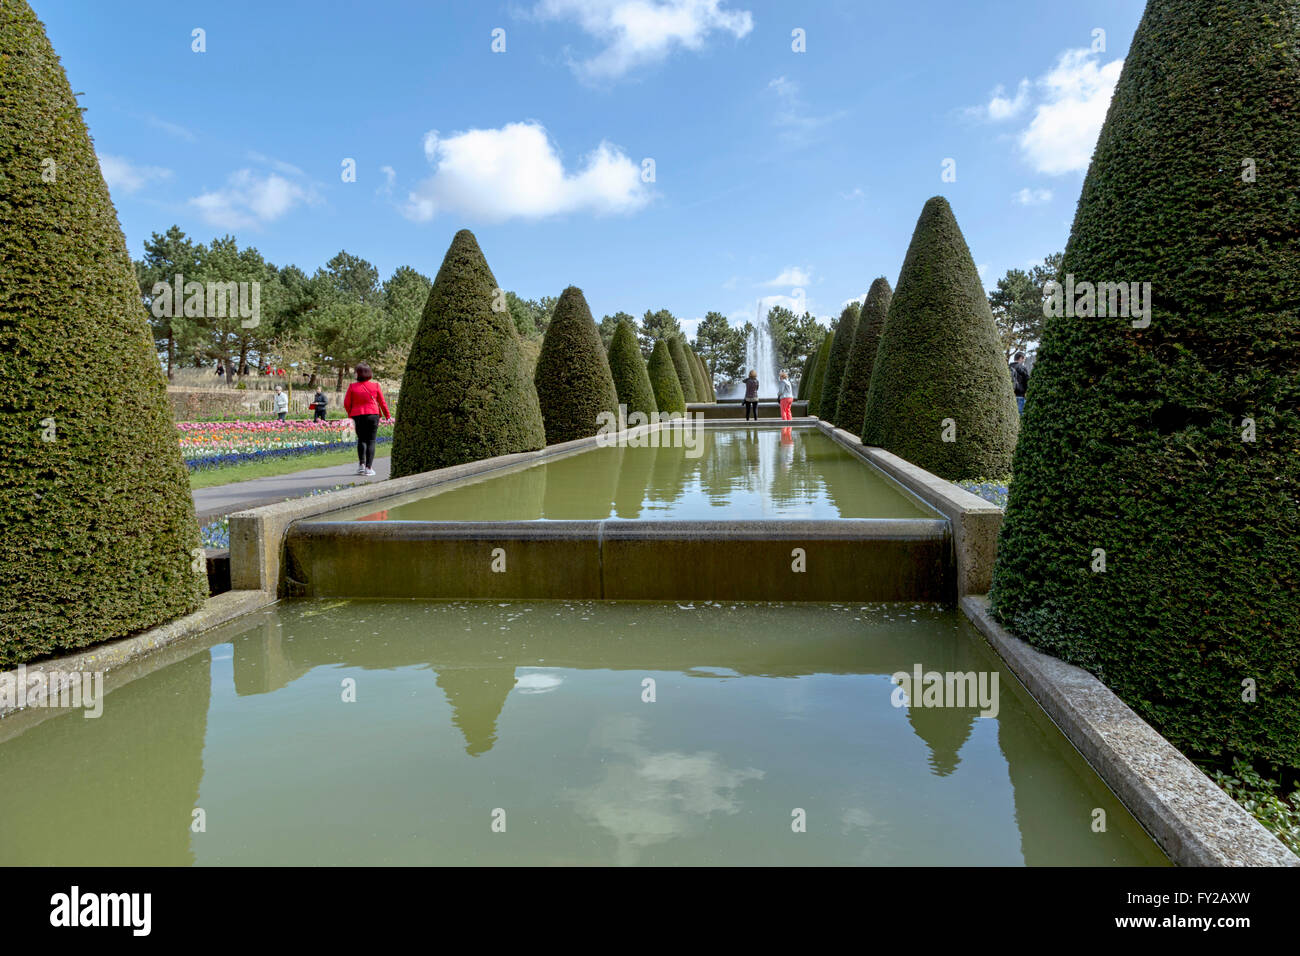 Topiary and fountain view at the famous Keukenhof, one of the world's largest flower gardens, Lisse, South Holland, Netherlands. Stock Photo